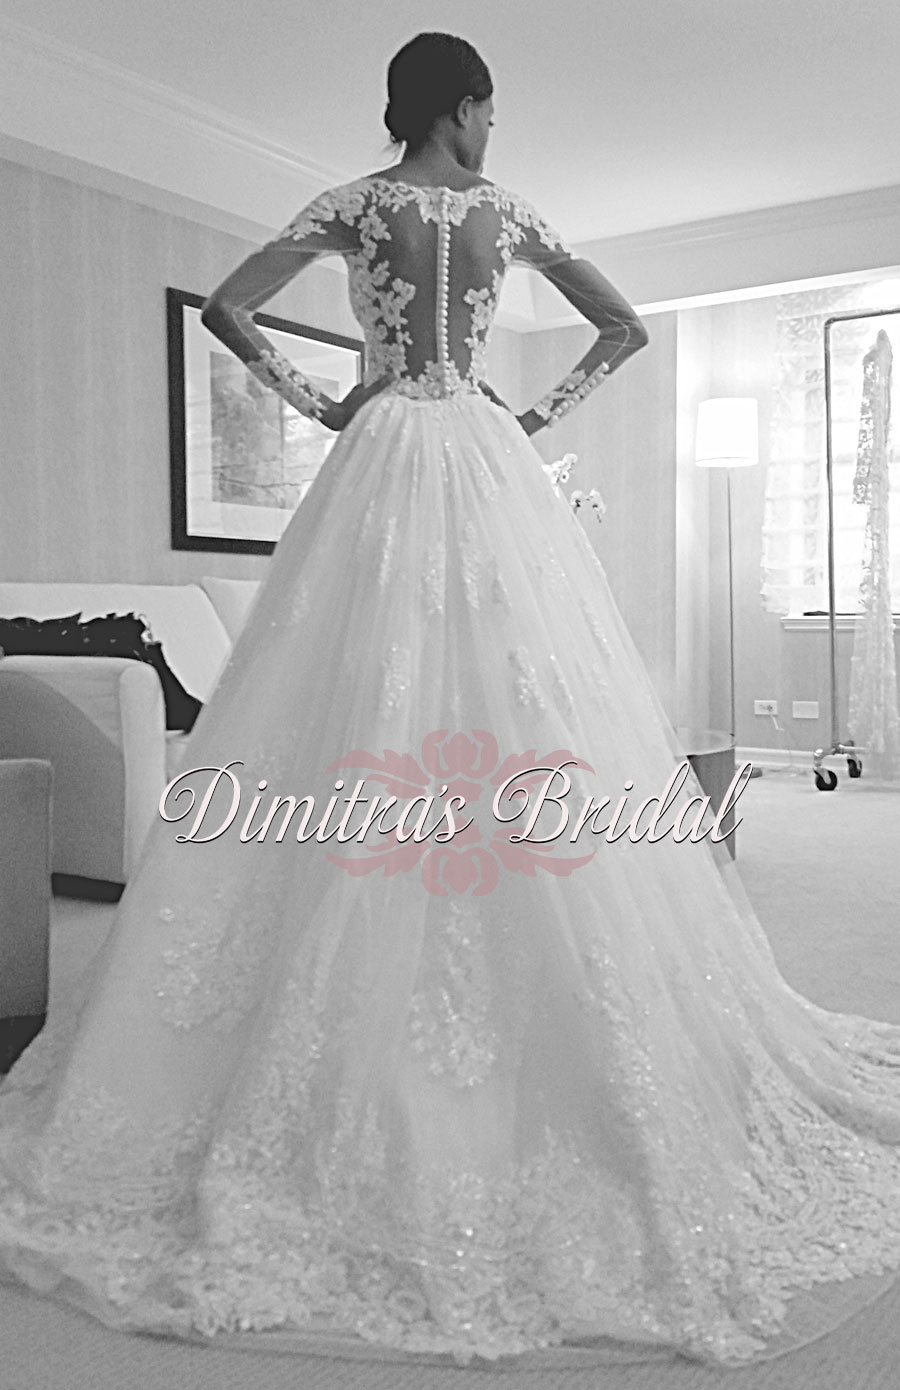 zuhair murad wedding gowns mia with overskirt back dimitras bridal chicago bw.jpg